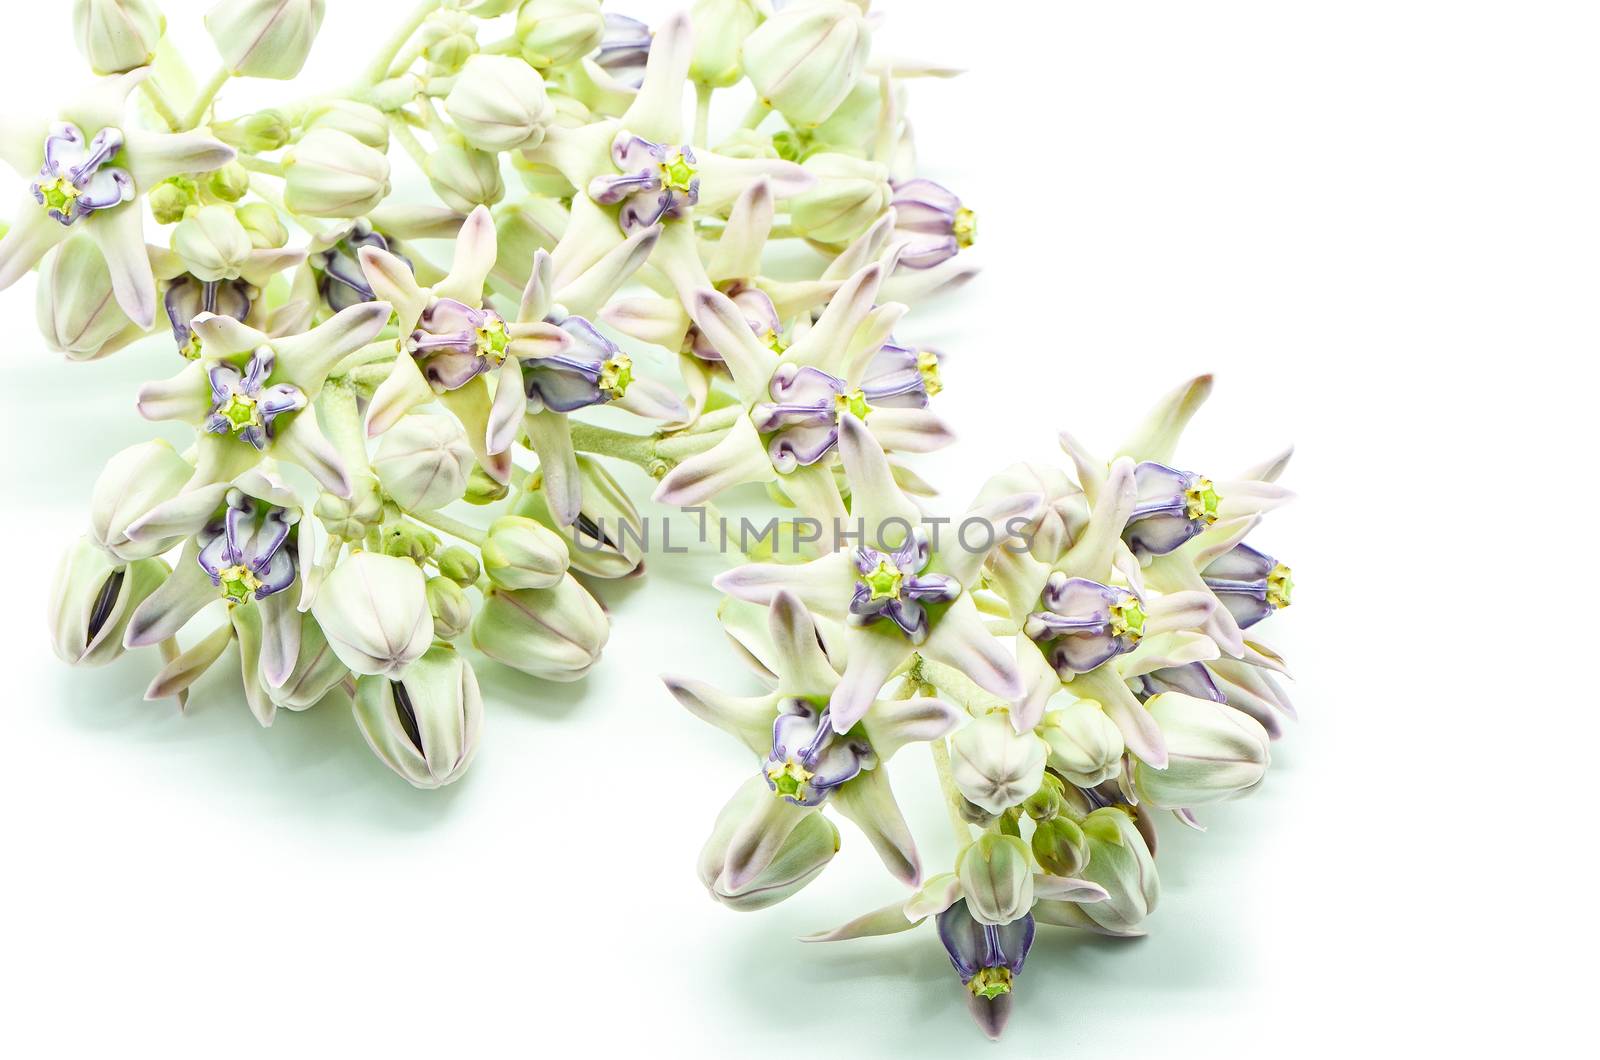 Colorful white and purple flower, Crown Flower, Giant Indian Milkweed, Gigantic Swallowwort (Calotropis gigantea) isolated on a white background